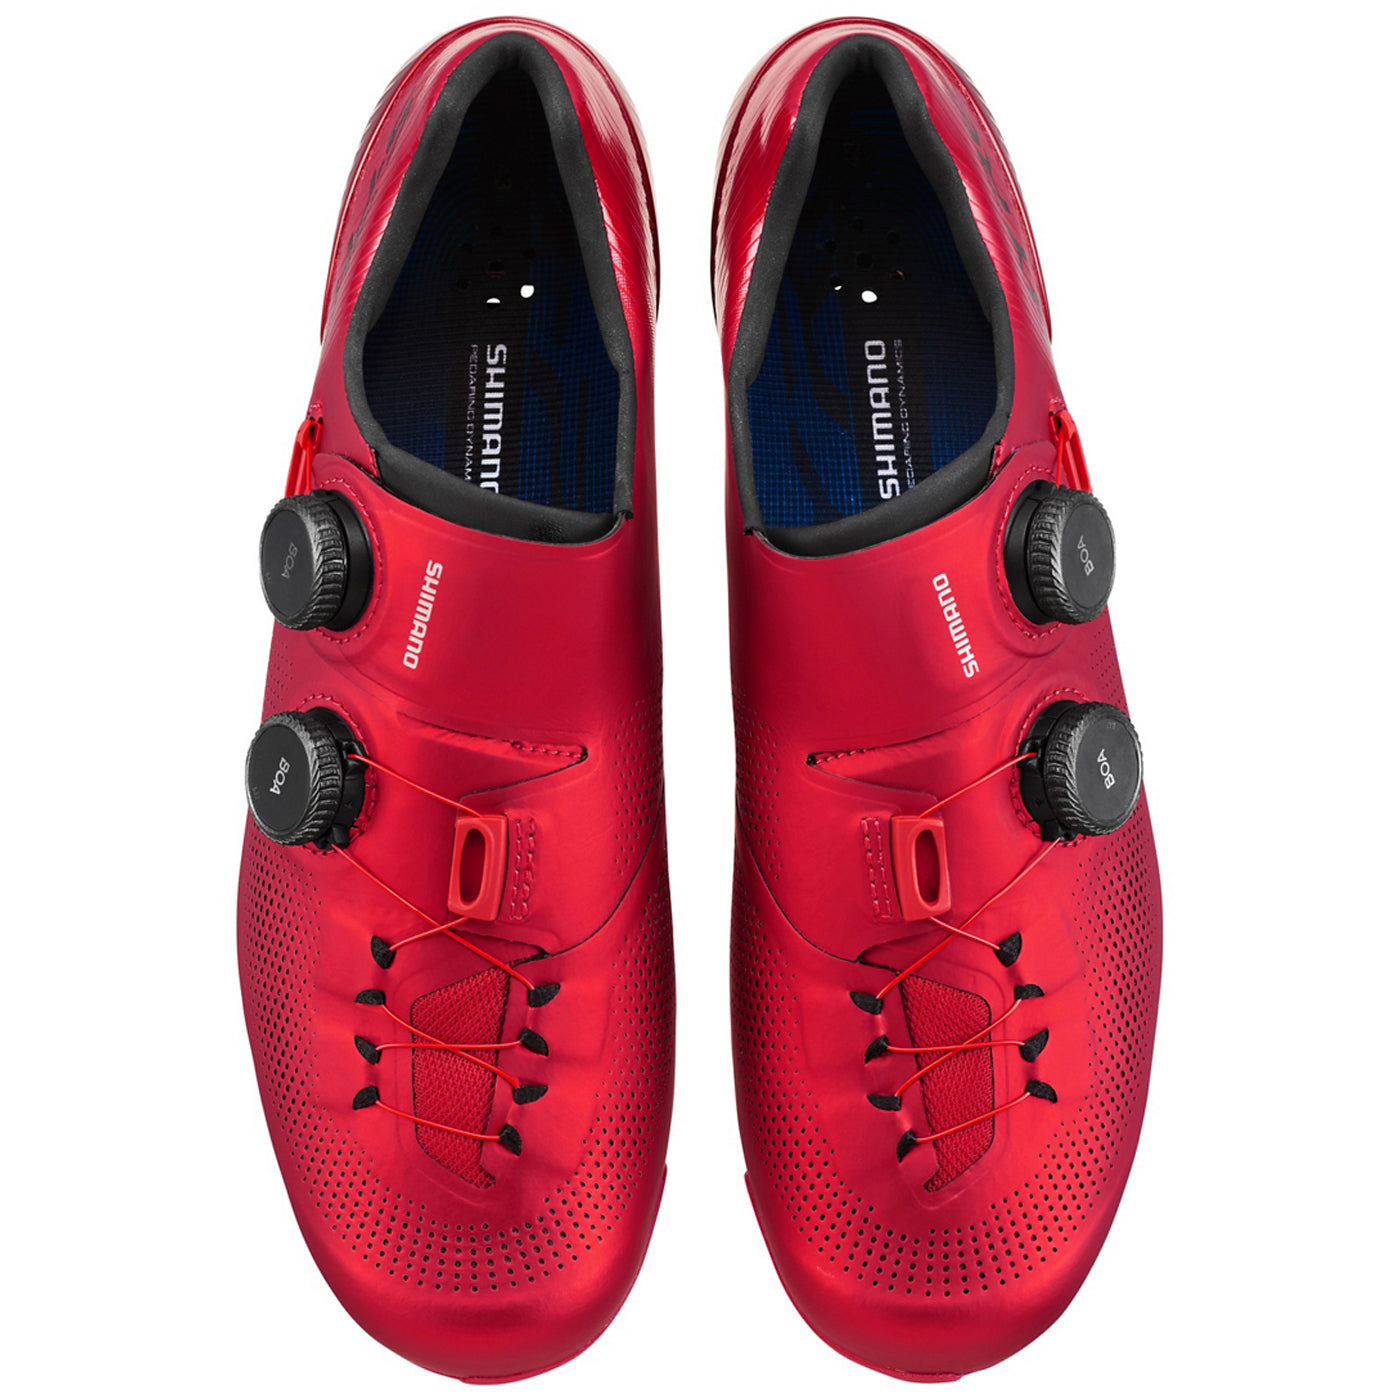 Shimano S-Phyre RC903 schuhe - Rot